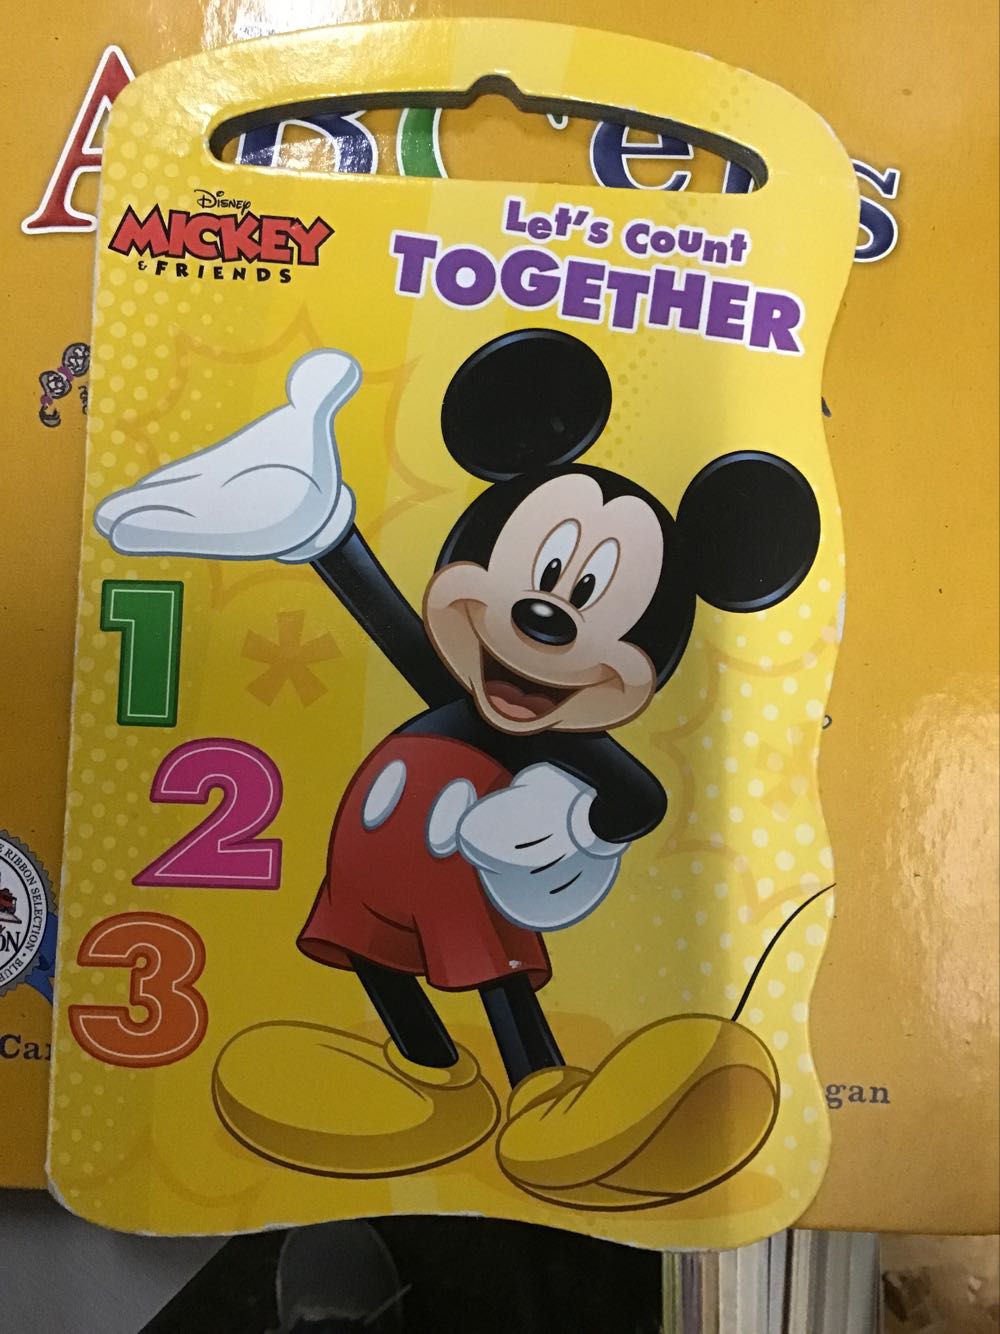 Dsc Mickey 5 X 8 Shaped Board Book with Handle (Value) - Disney book collectible [Barcode 9781453077399] - Main Image 1